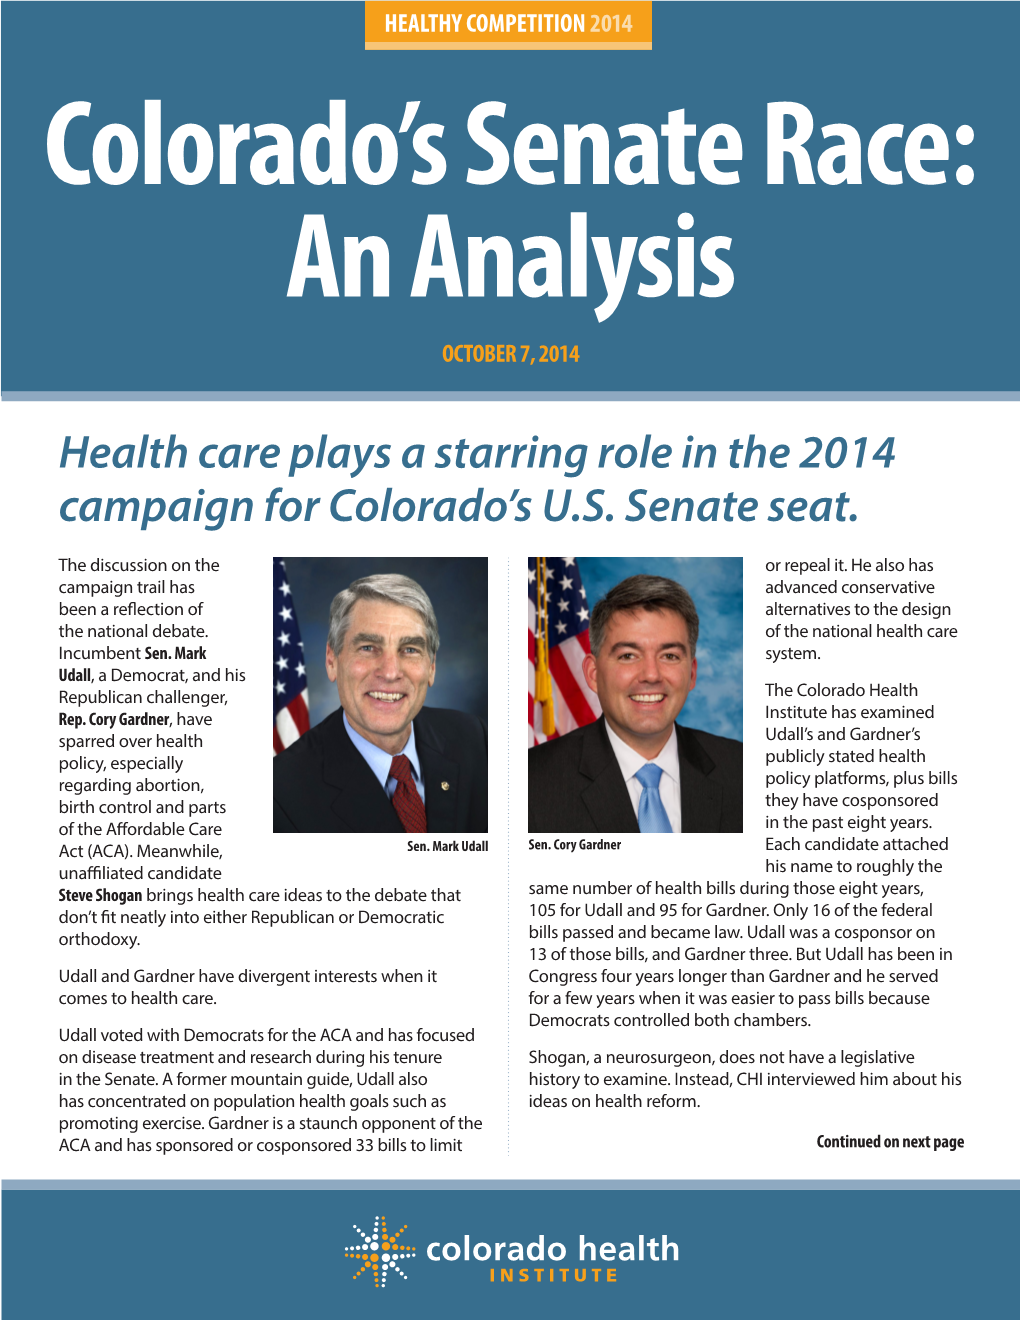 Health Care Plays a Starring Role in the 2014 Campaign for Colorado's U.S. Senate Seat